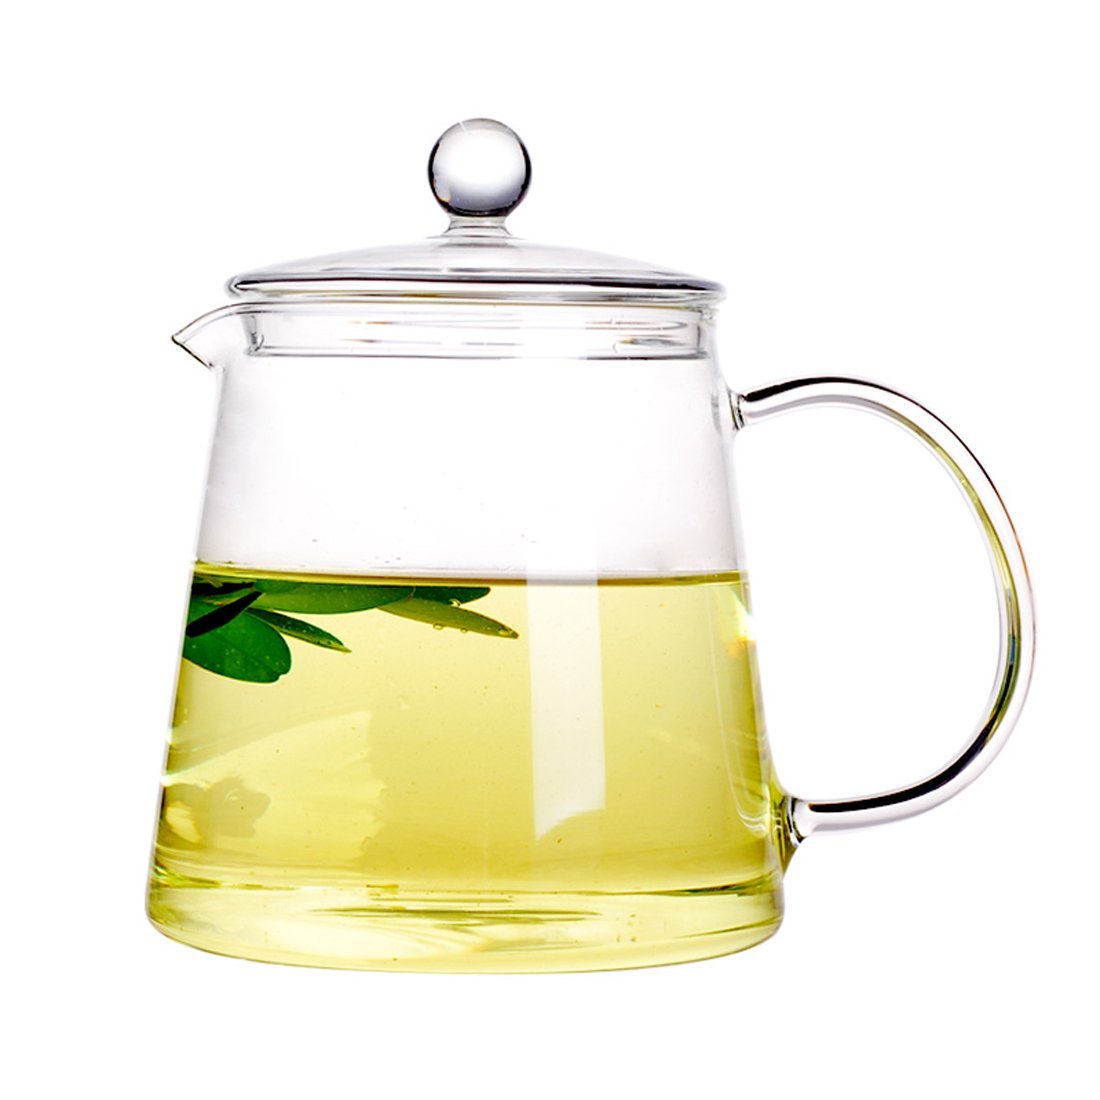 7 Safest Non Toxic Tea Kettles That Are Plastic Free and Healthy